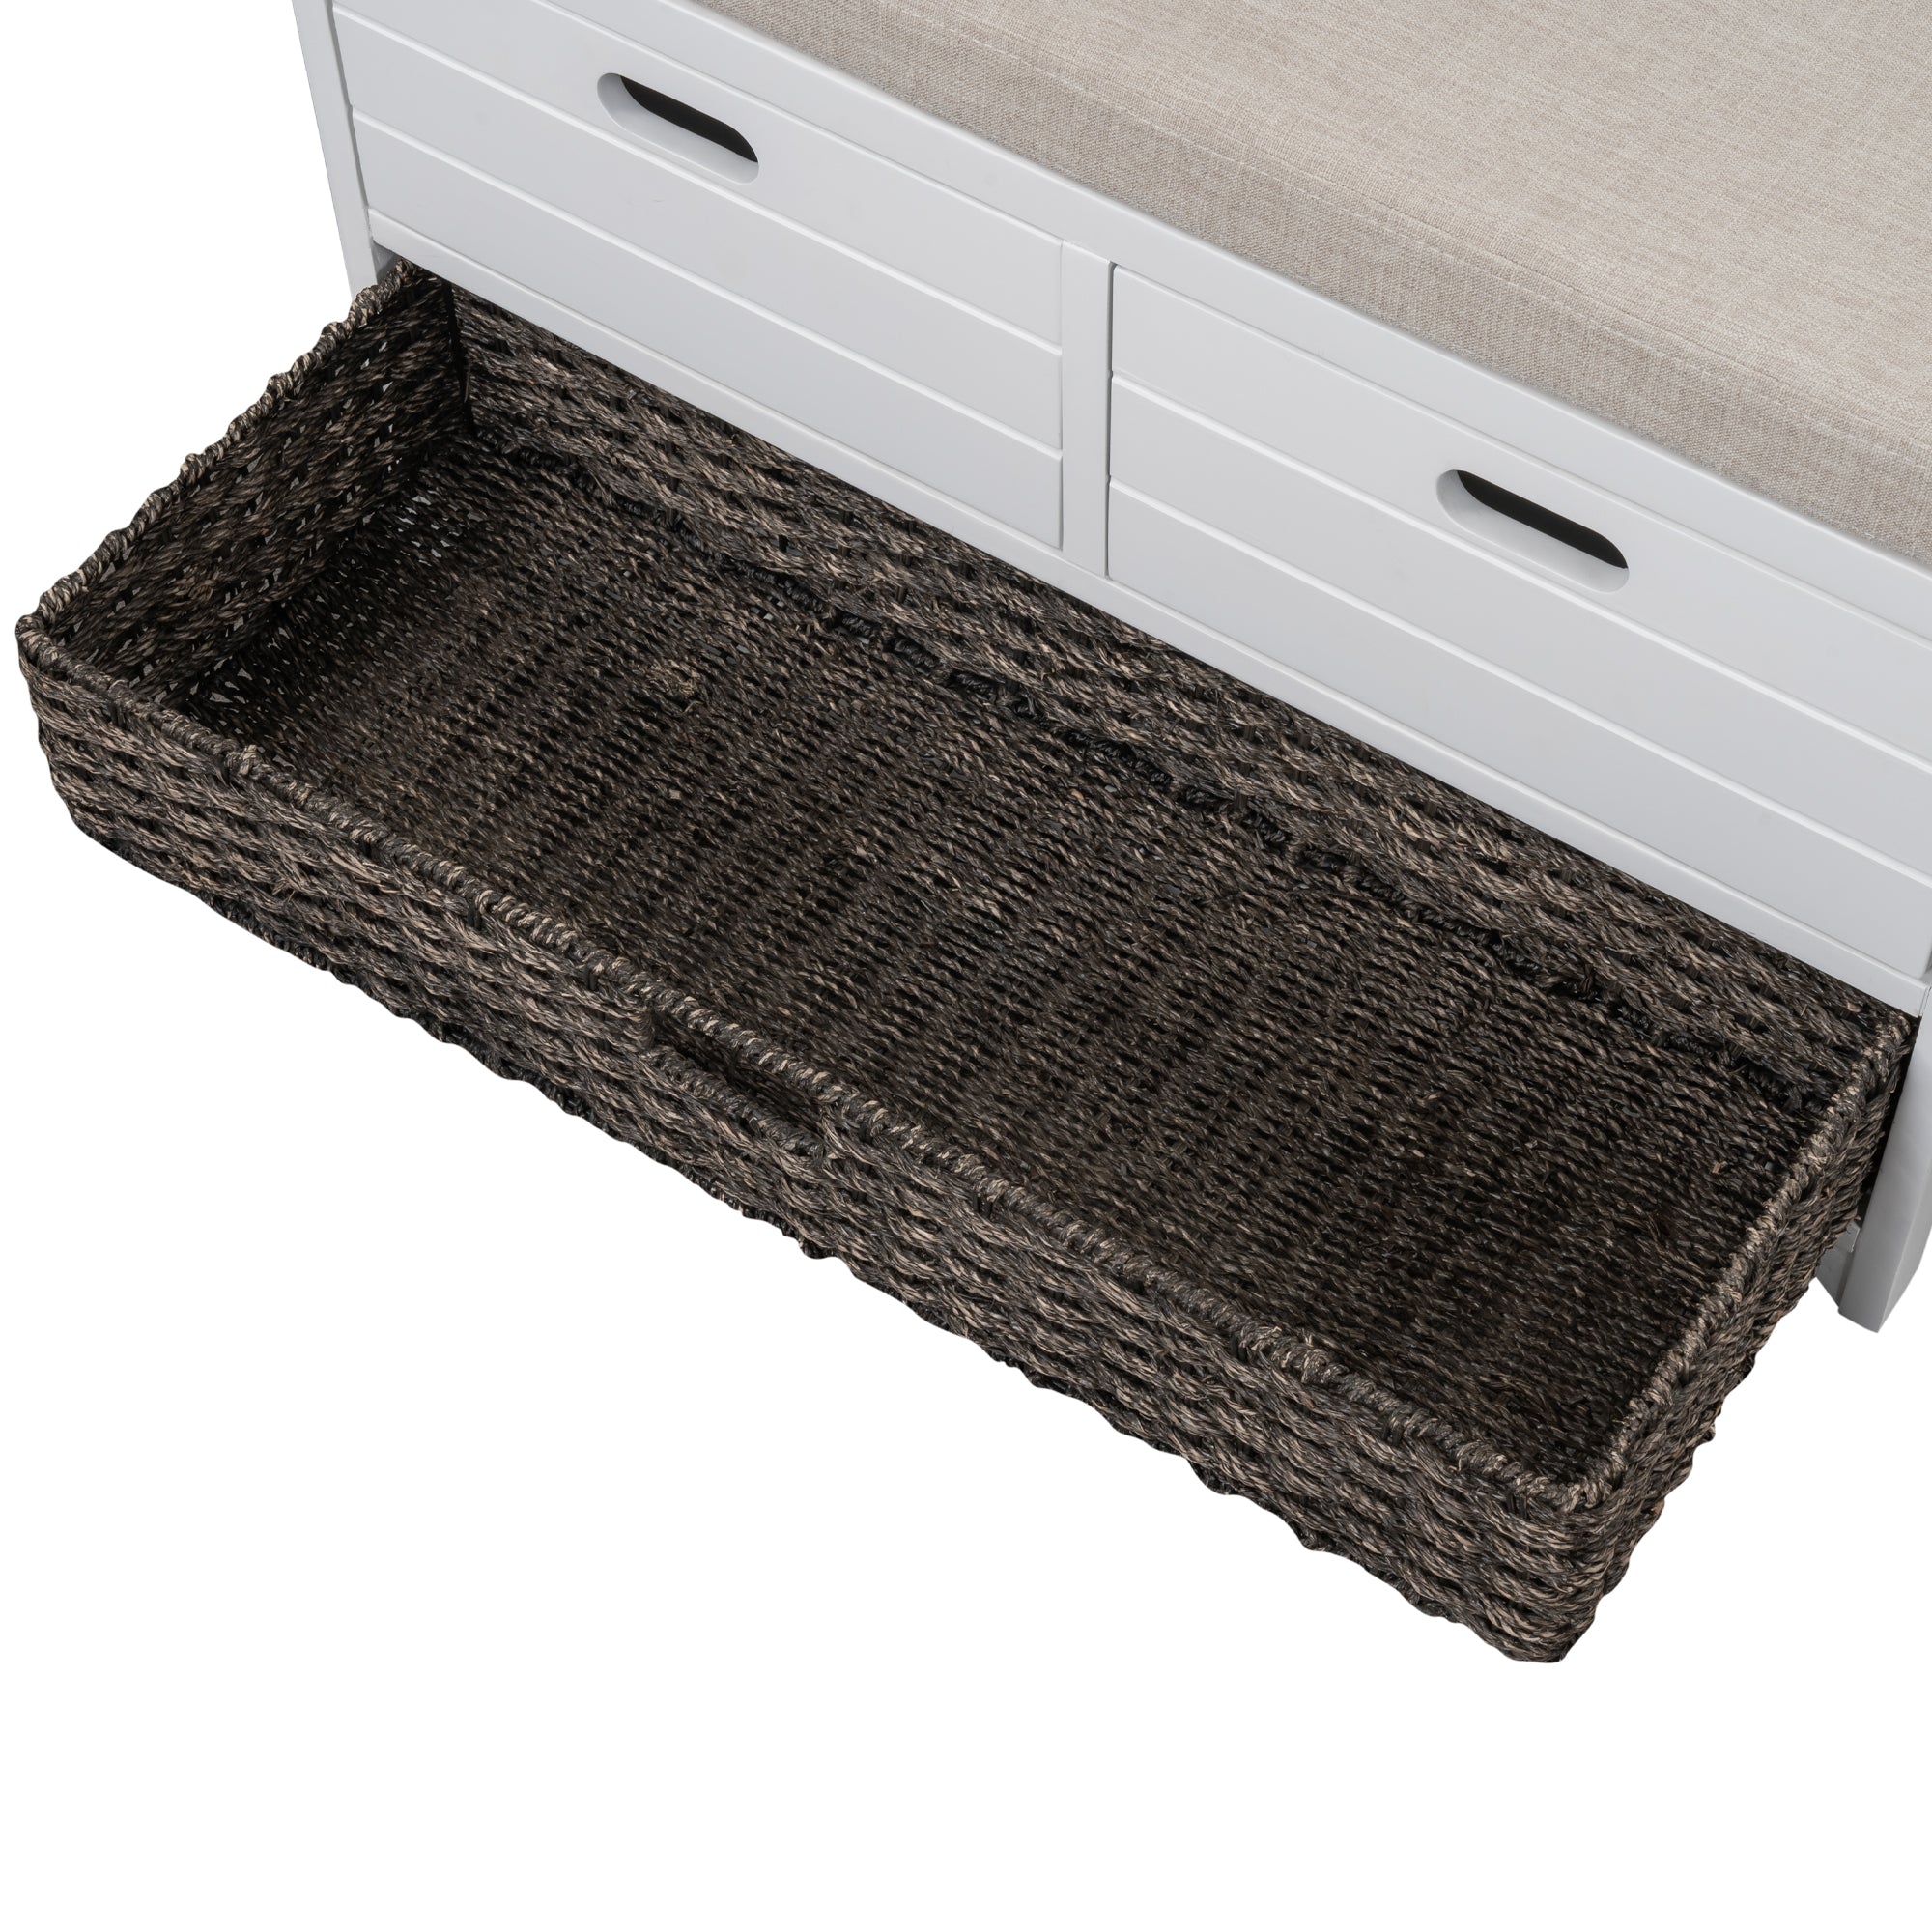 Bellemave® Storage Bench with Removable Basket and 2 Drawers Bellemave®